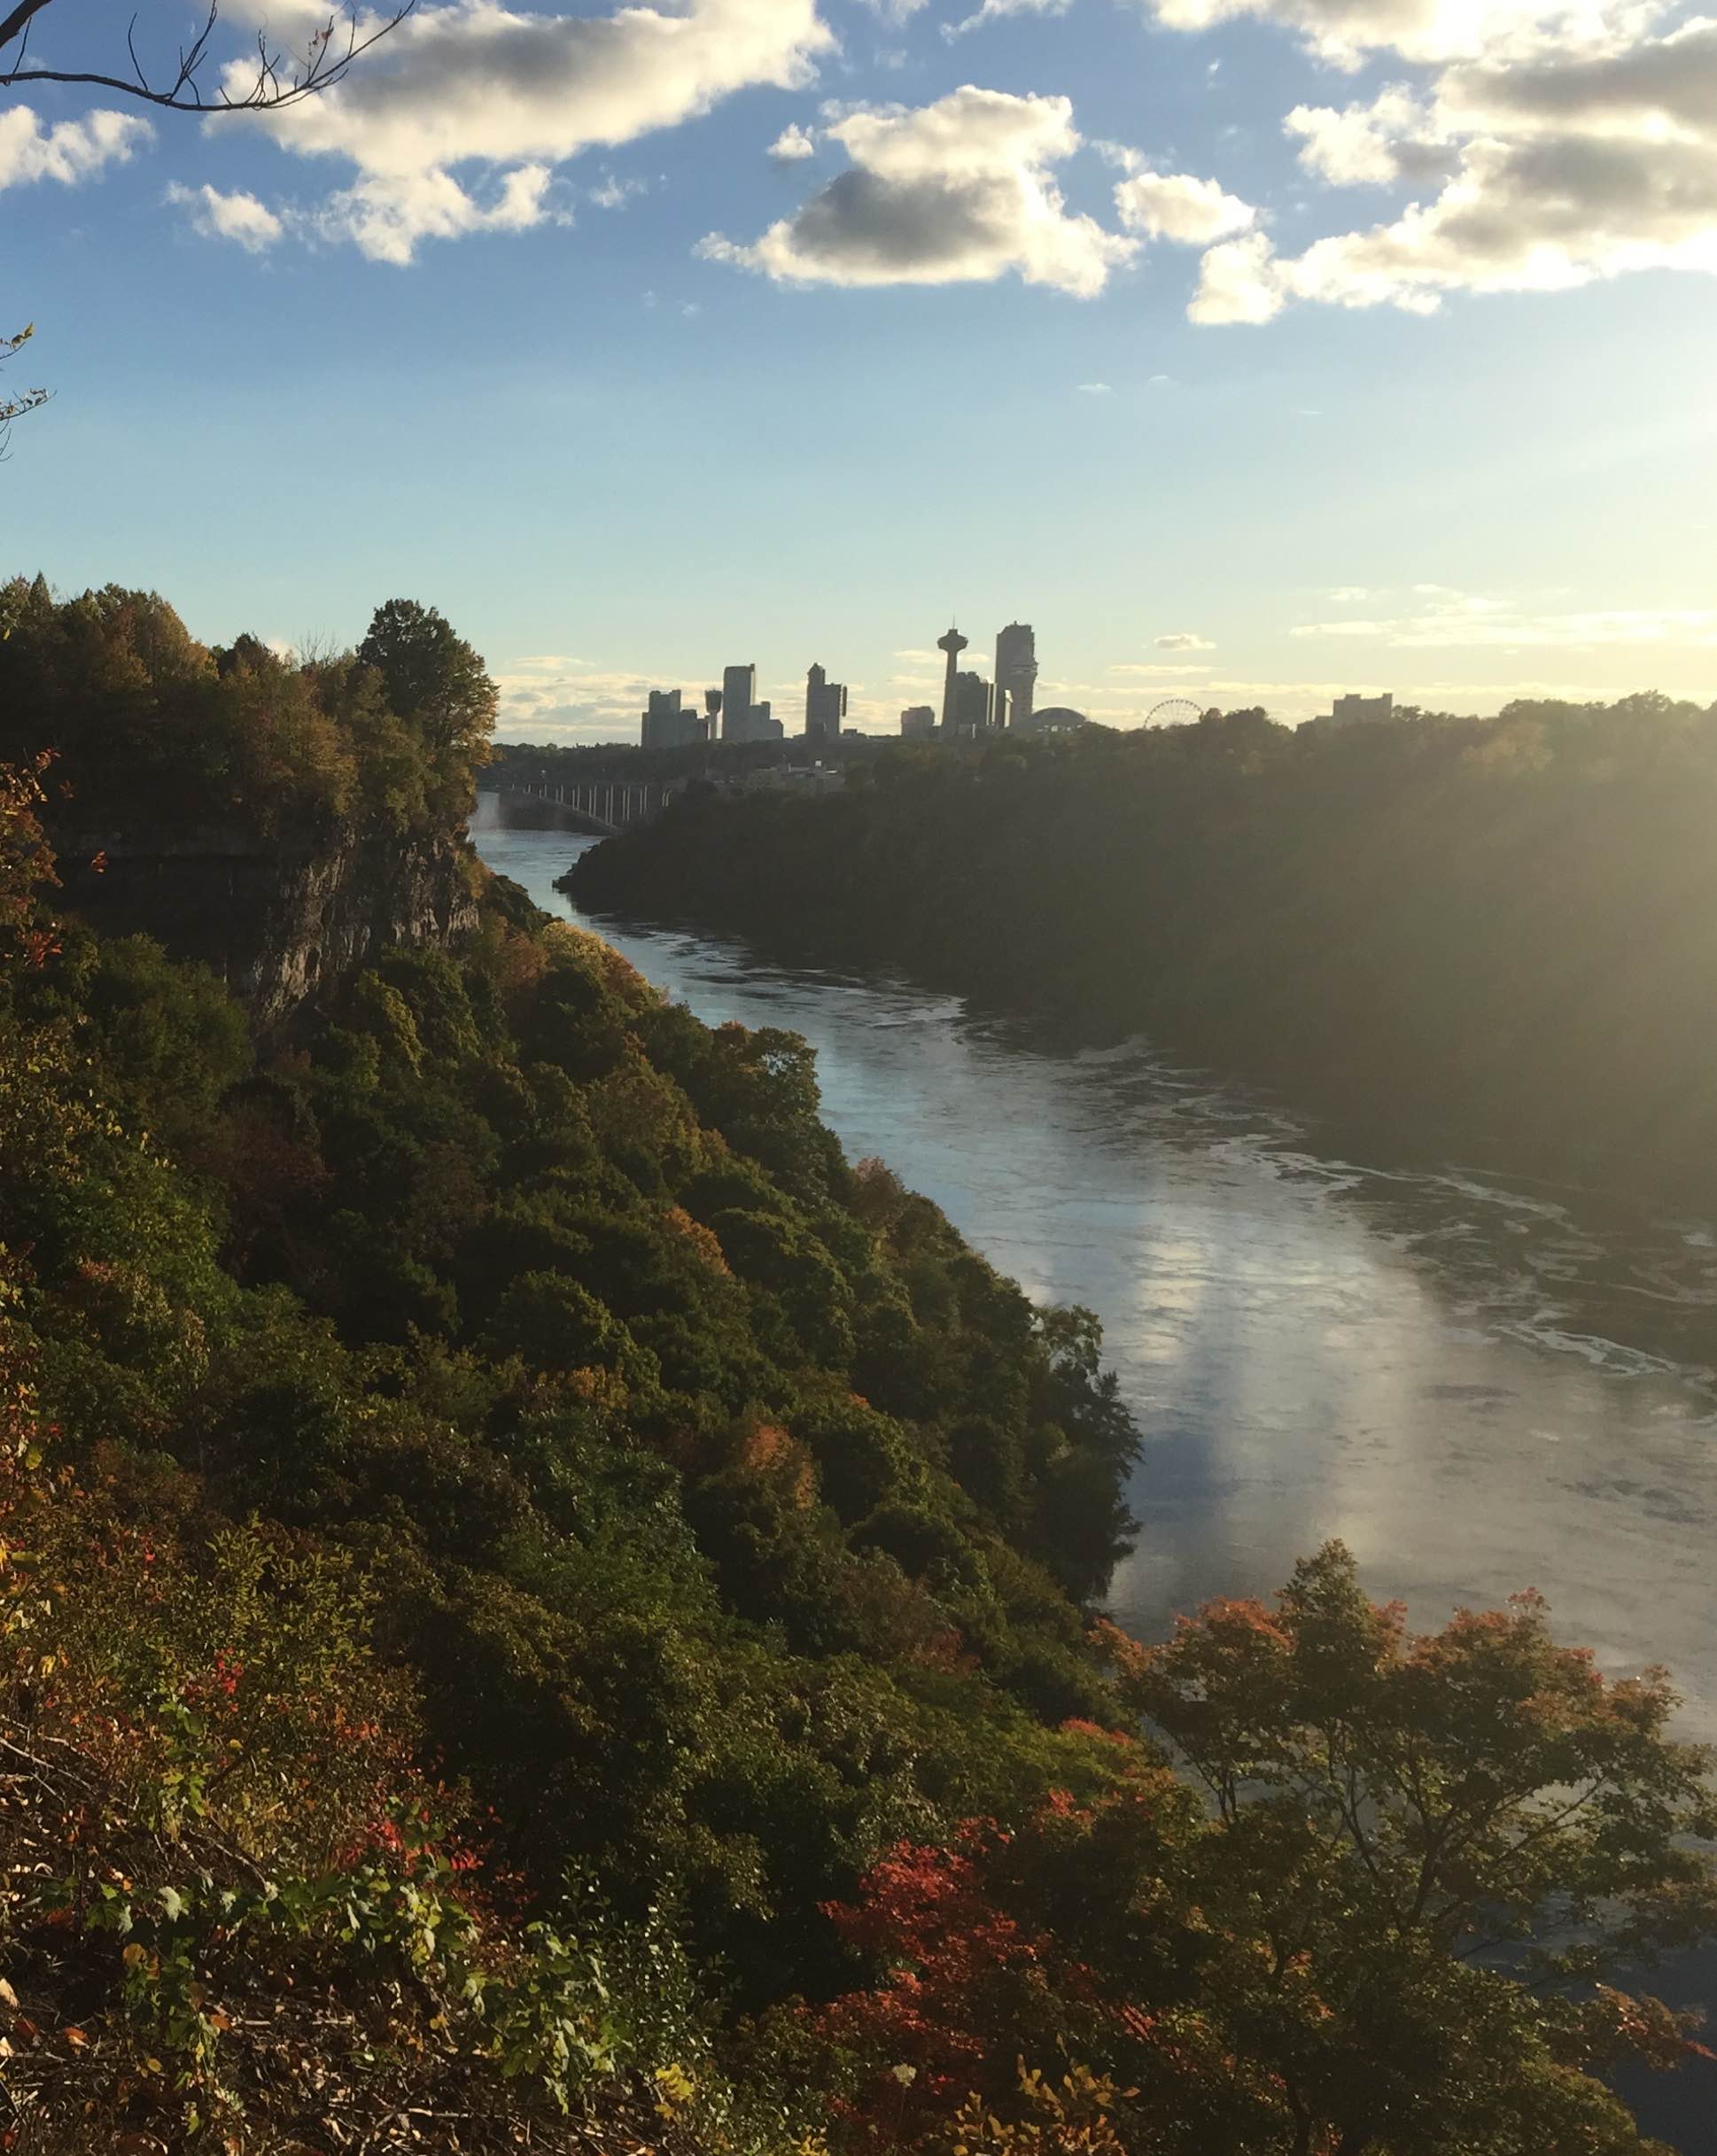 Land Conservancy invites community to birdwatching hike in the Niagara Gorge